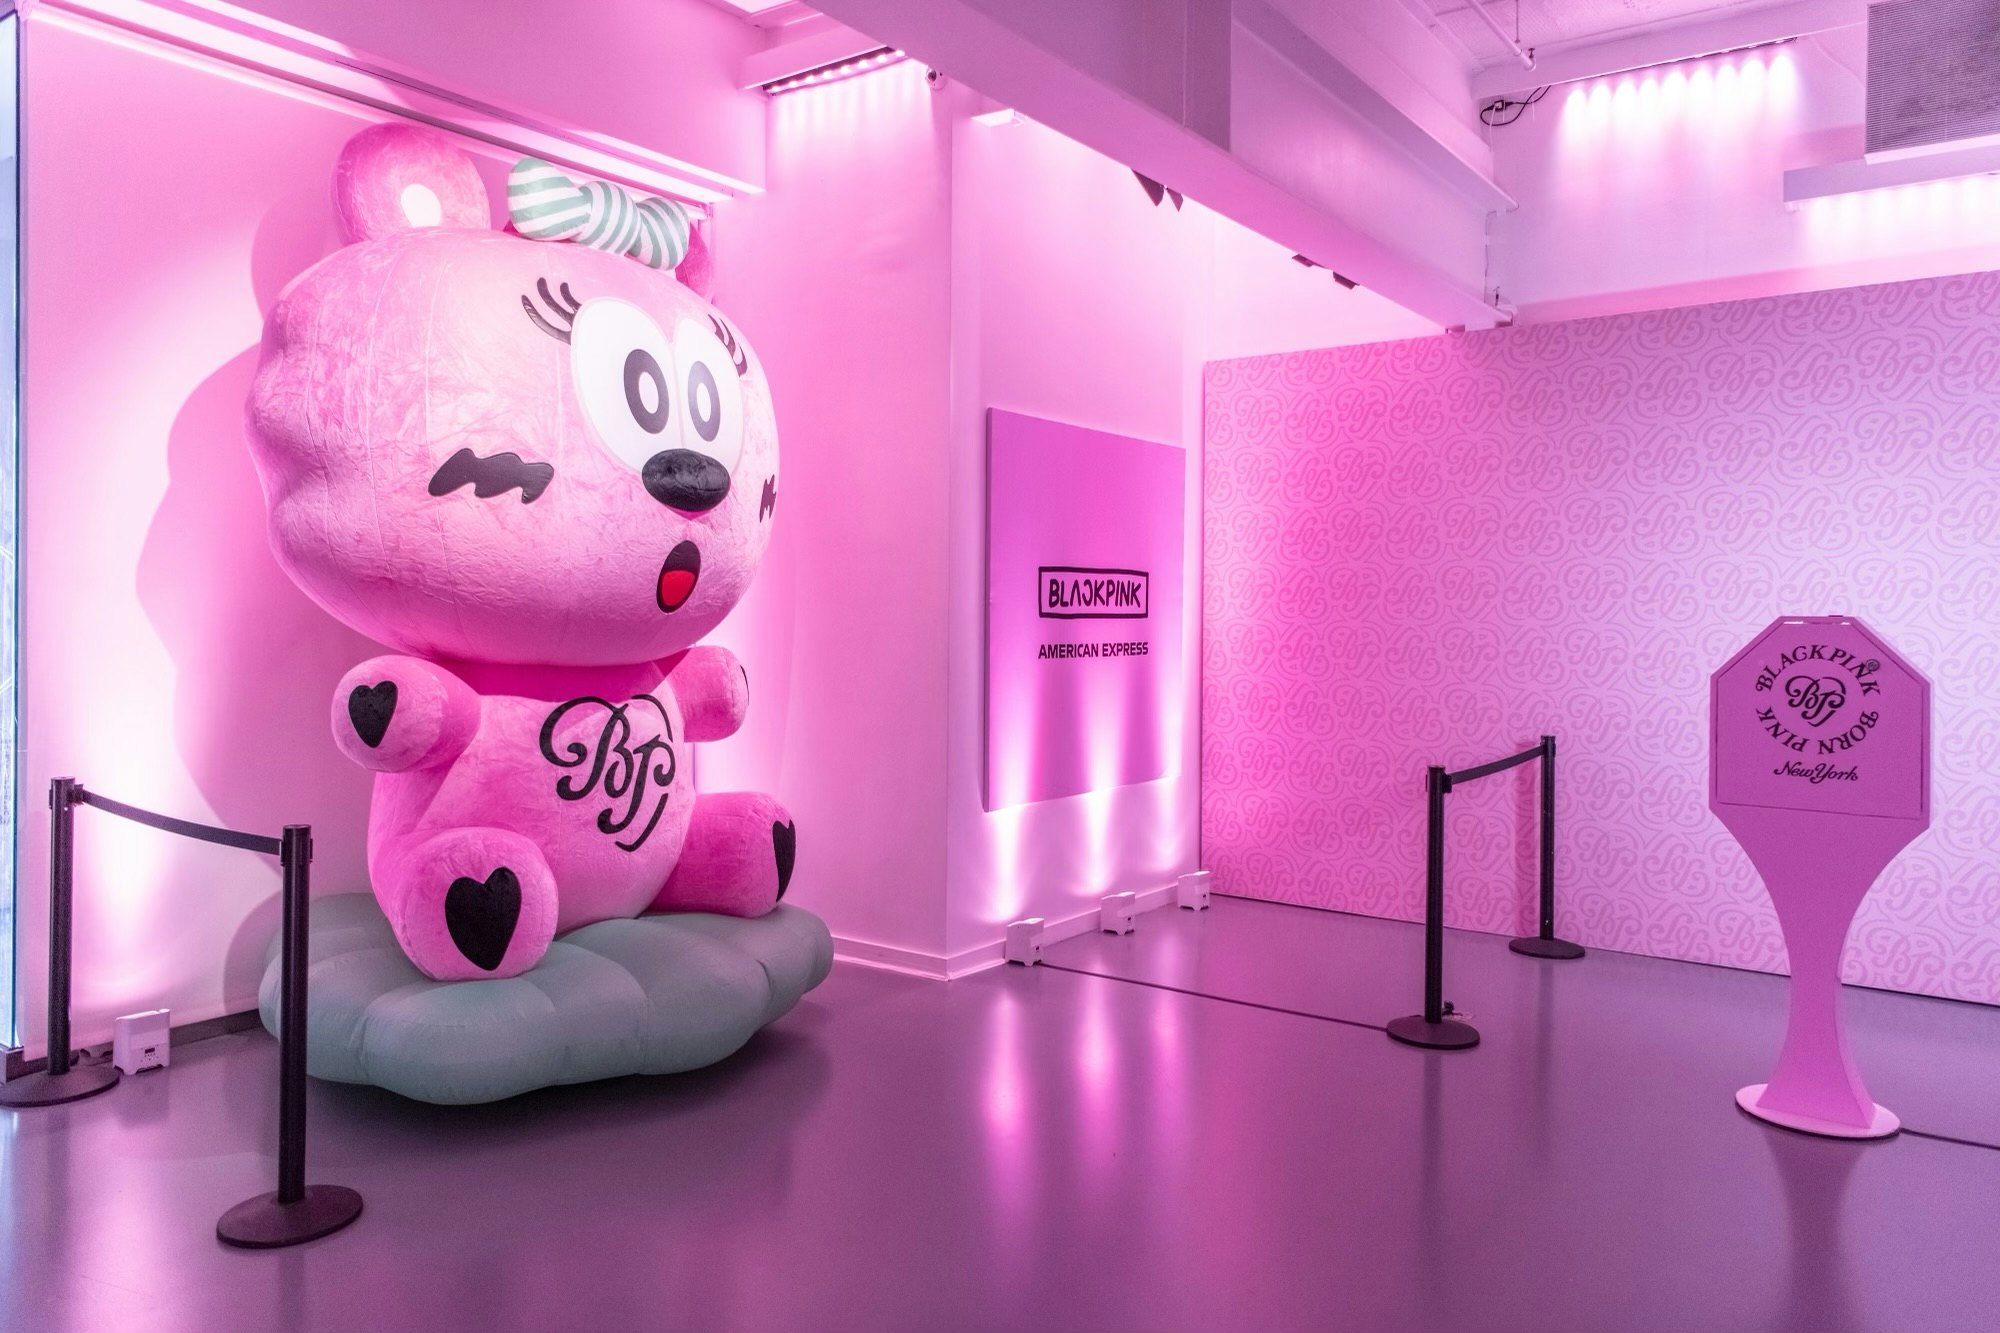 I Went To BLACKPINK's 'Born Pink' NYC Pop Up &, OMG, The Merch